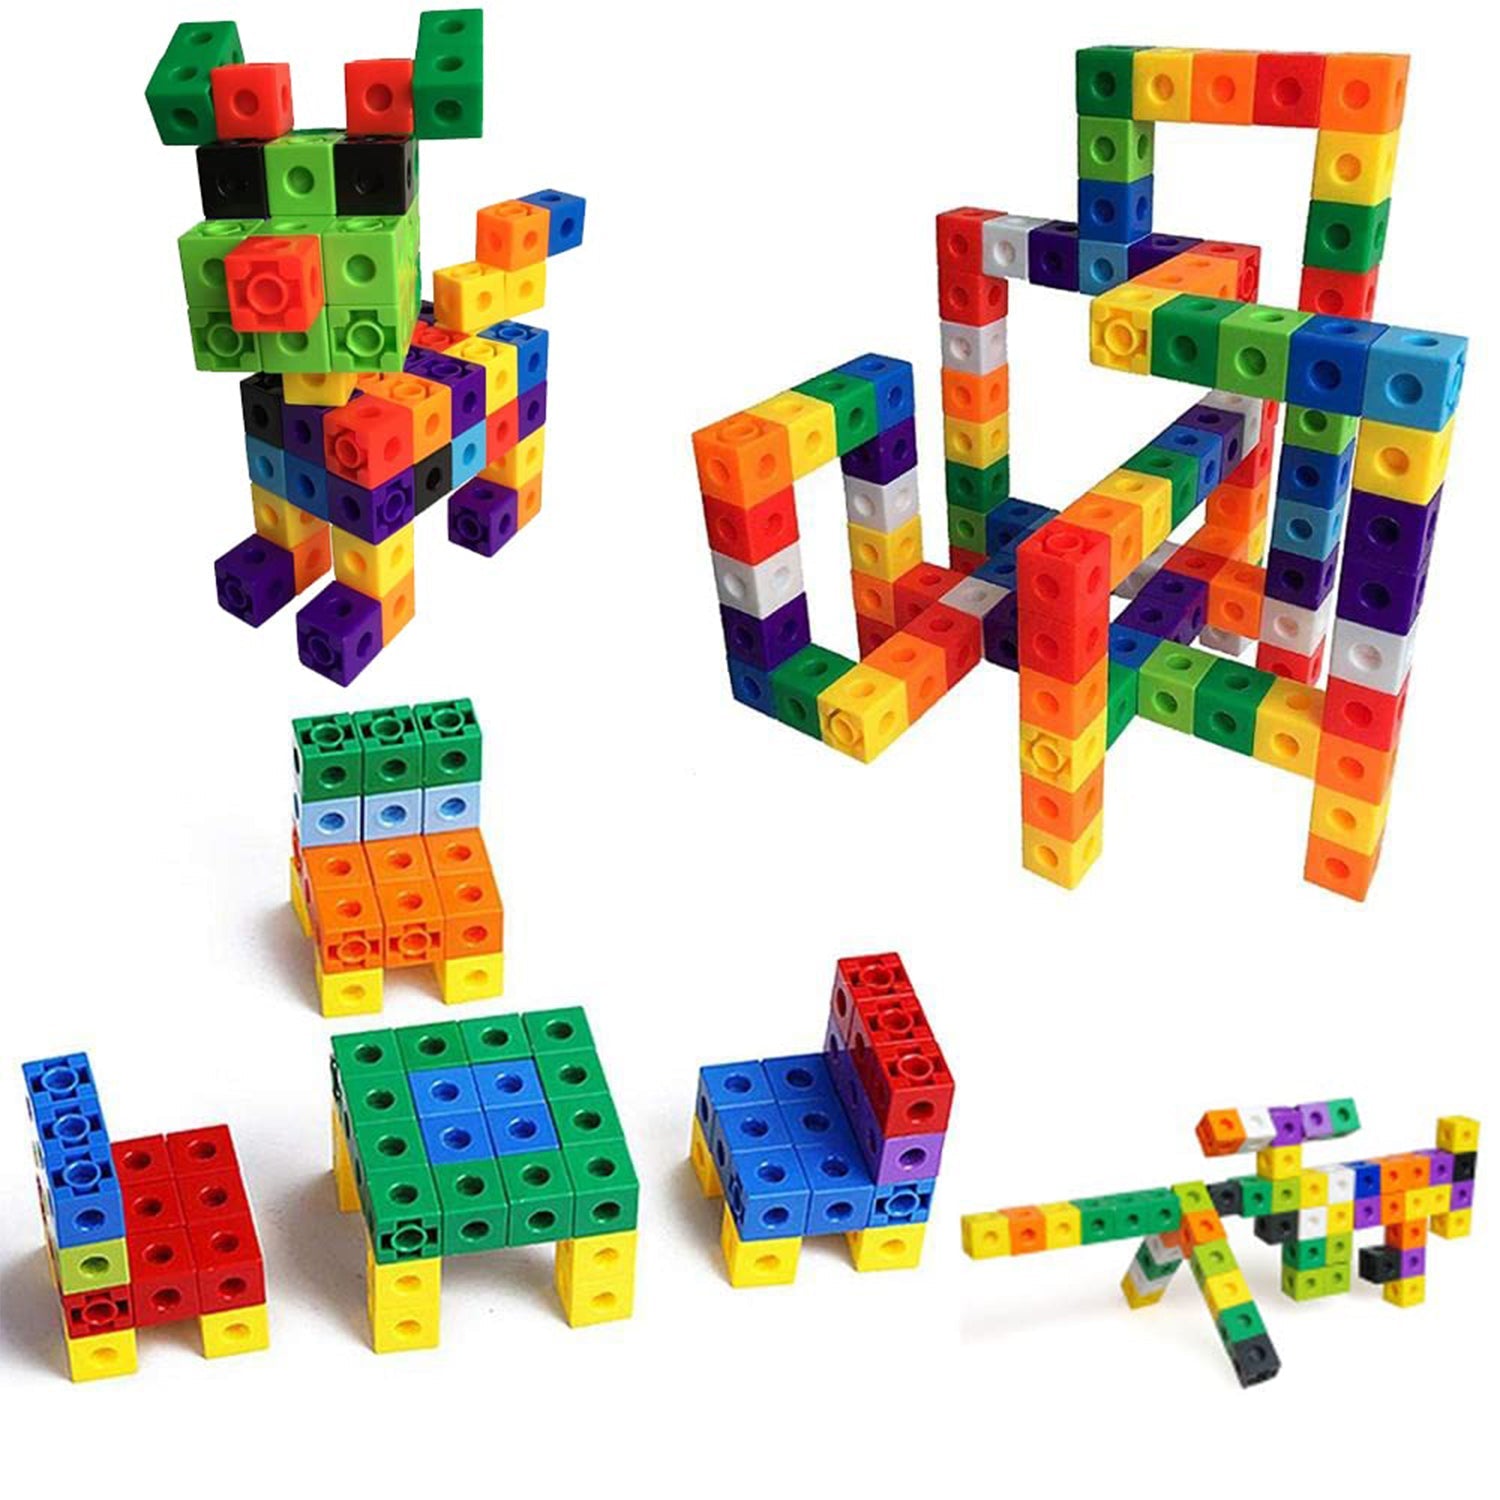 3913 120 Pc Cube Blocks Toy used in all kinds of household and official places specially for kids and children for their playing and enjoying purposes.